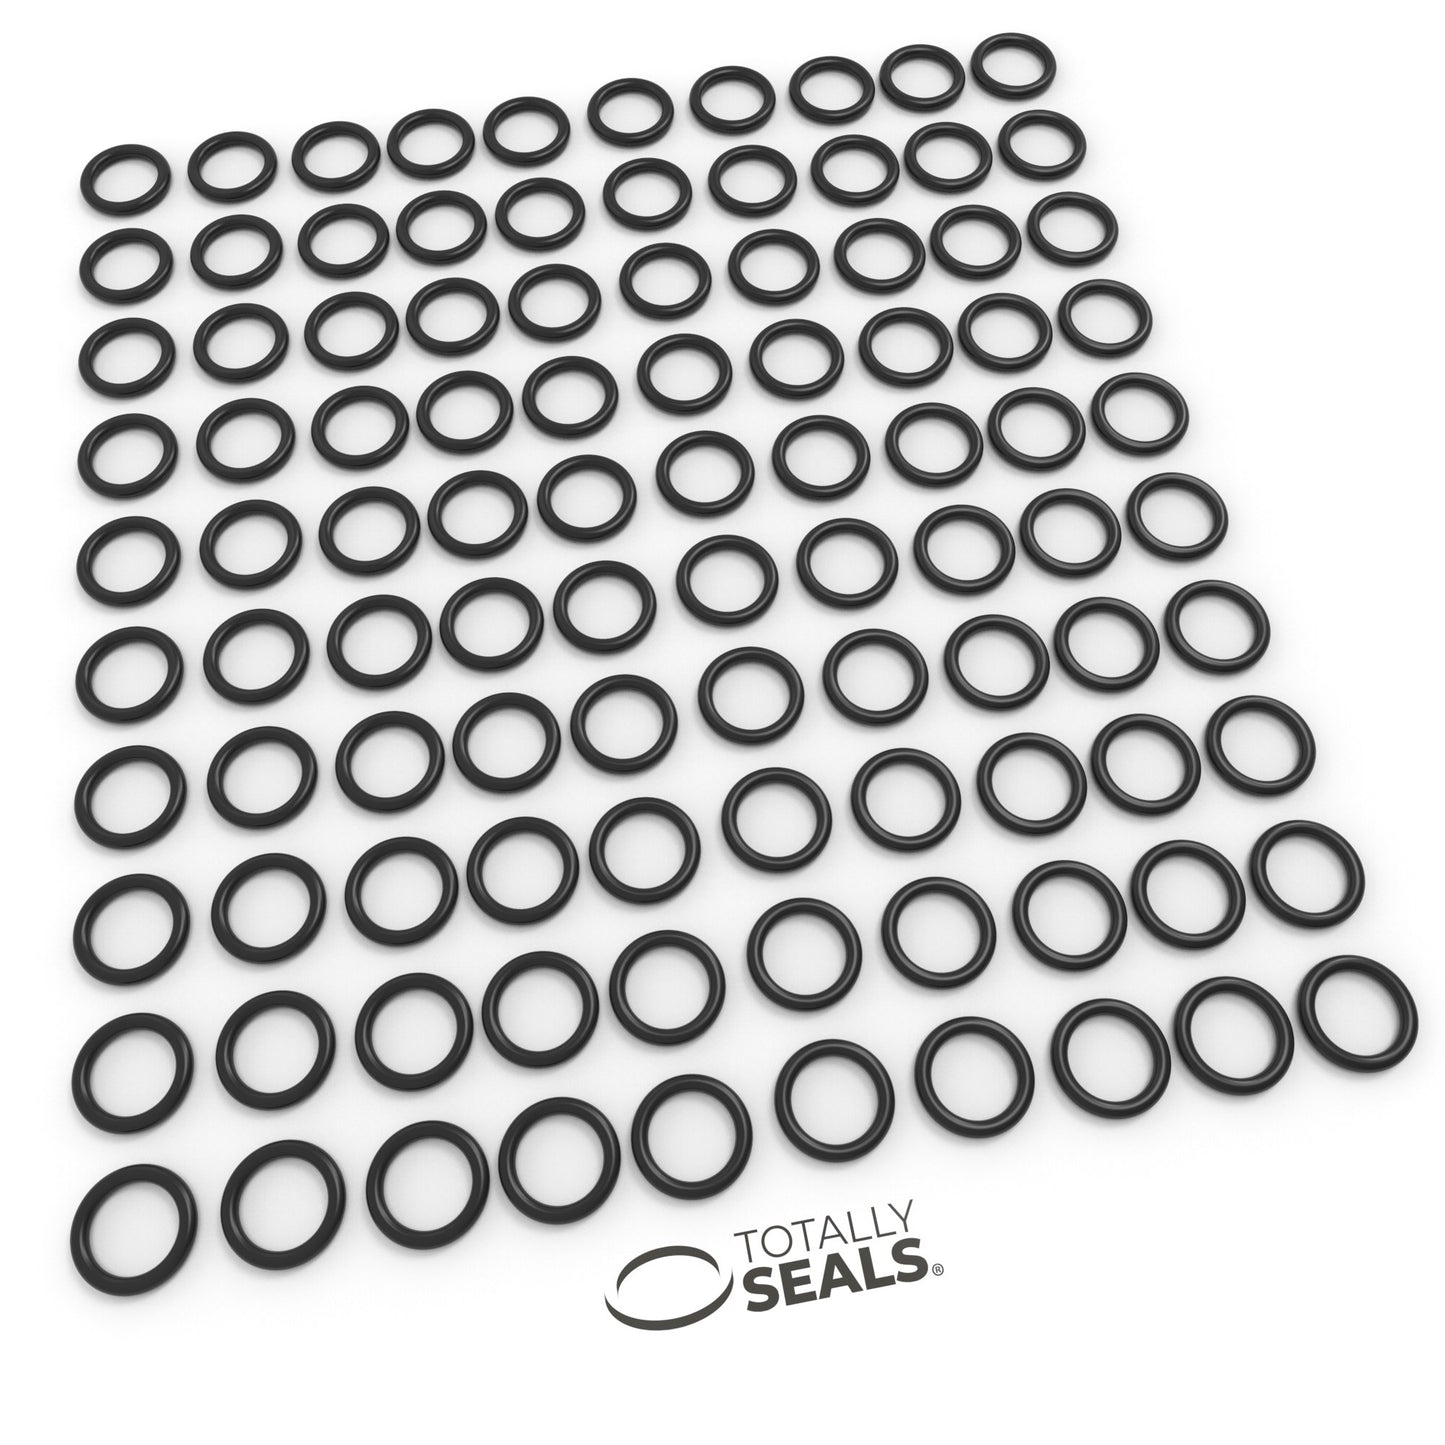 15/16" x 3/32" (BS119) Imperial Nitrile O-Rings - Totally Seals®